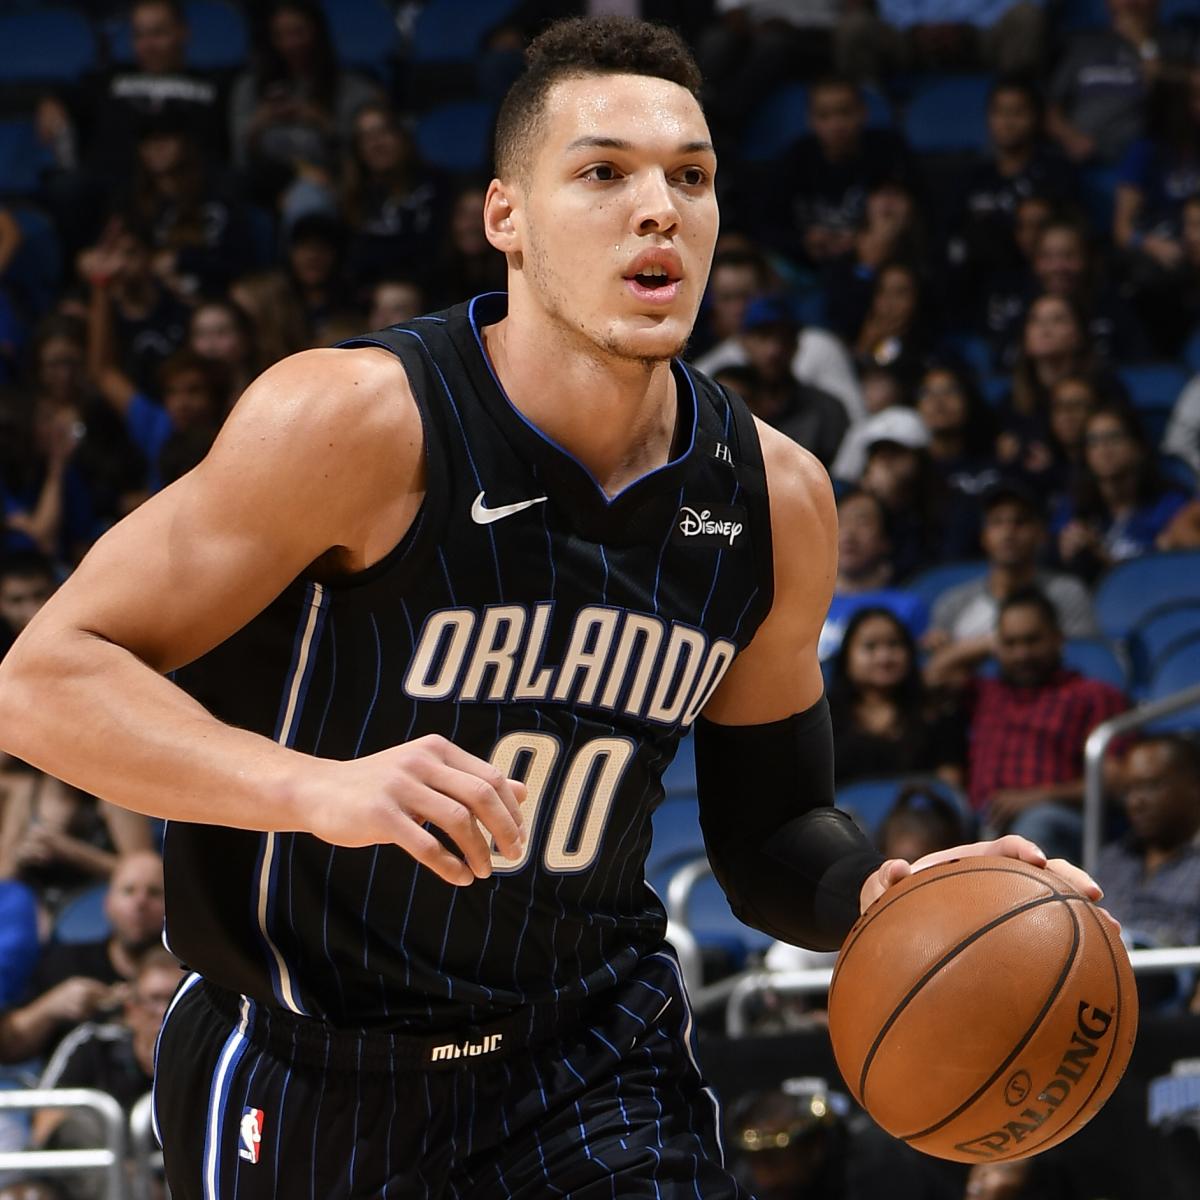 Aaron Gordon Agrees to ReSign with Magic for Reported 4 Years, 84